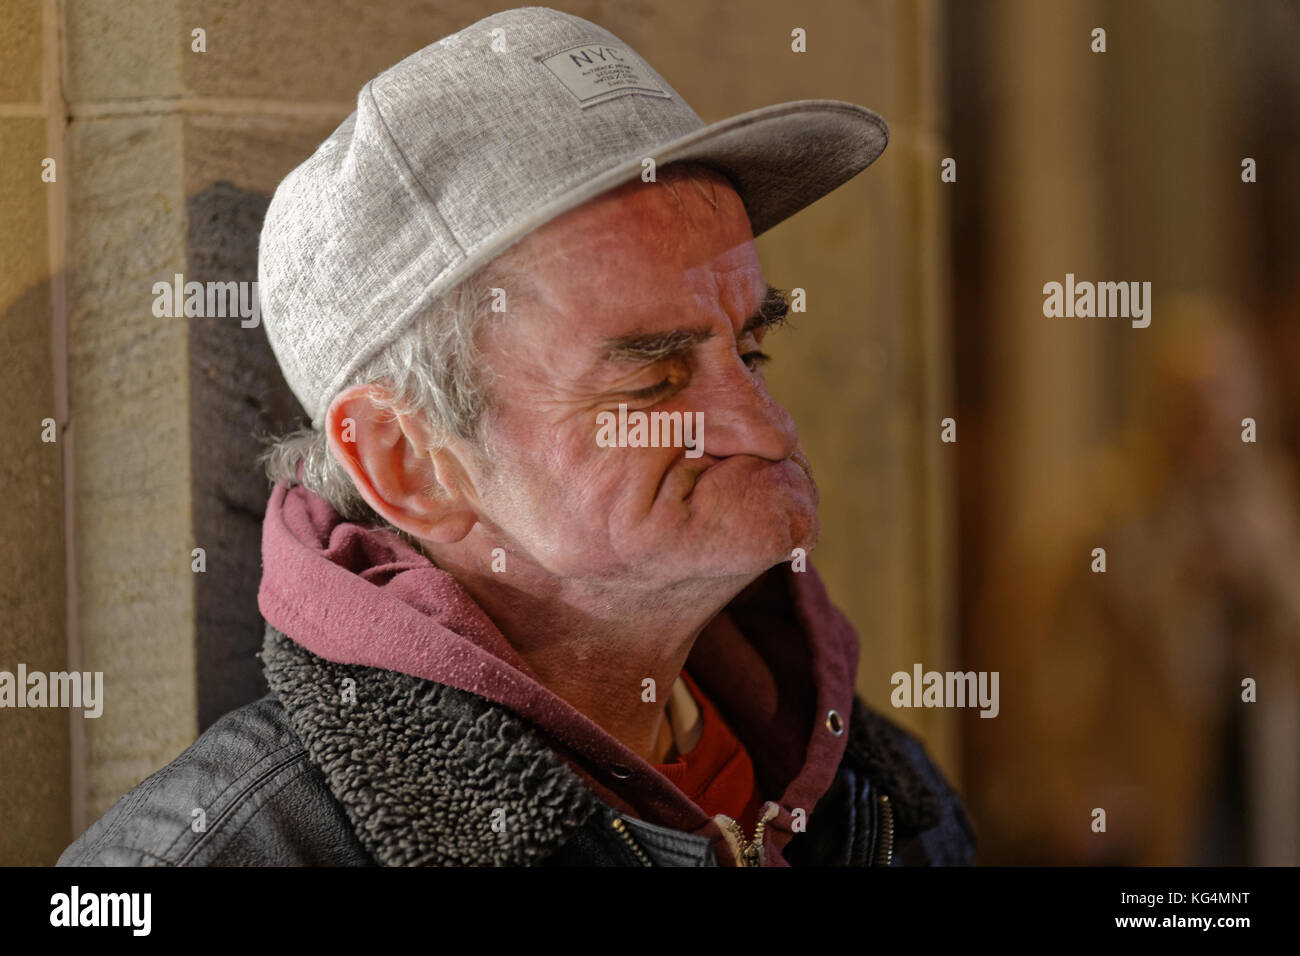 homeless man in glasgow who entertains doing popeye impressions in a baseball hat gurning Stock Photo